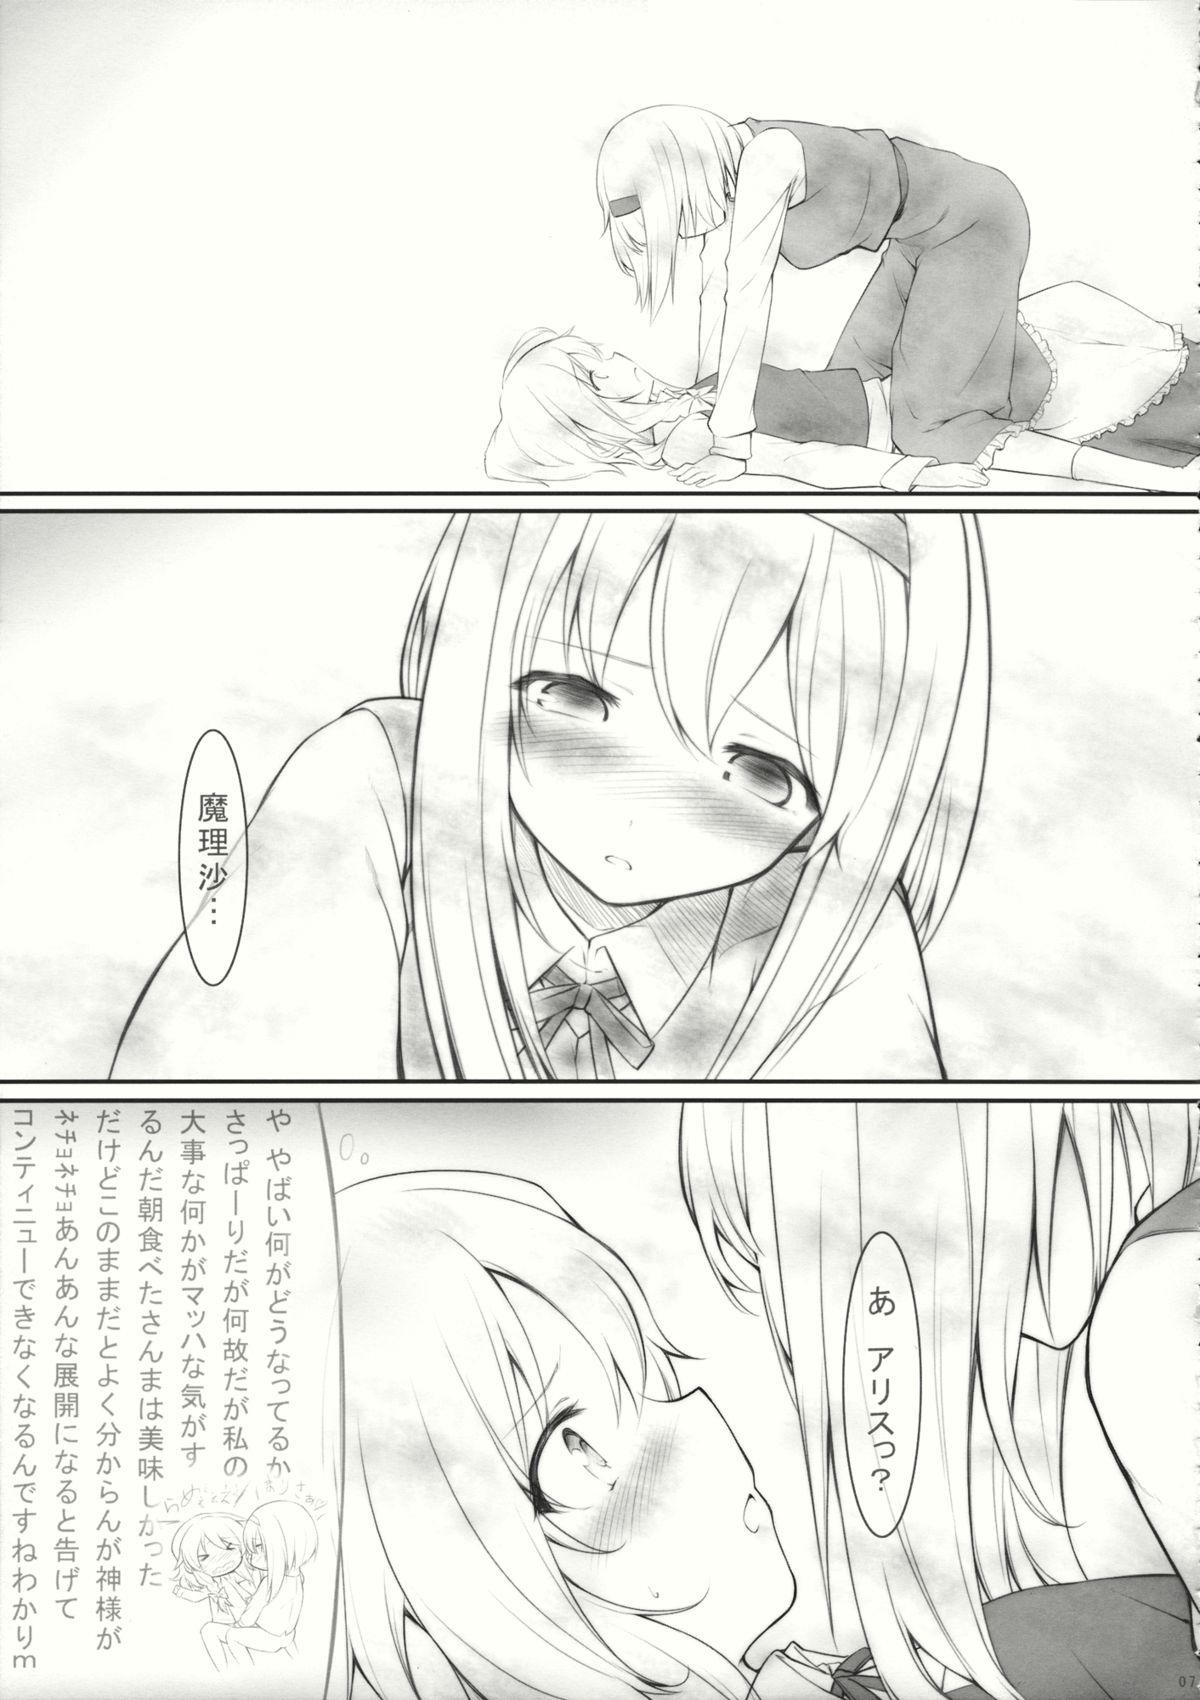 Asiansex kiss or kiss? - Touhou project Women - Page 6